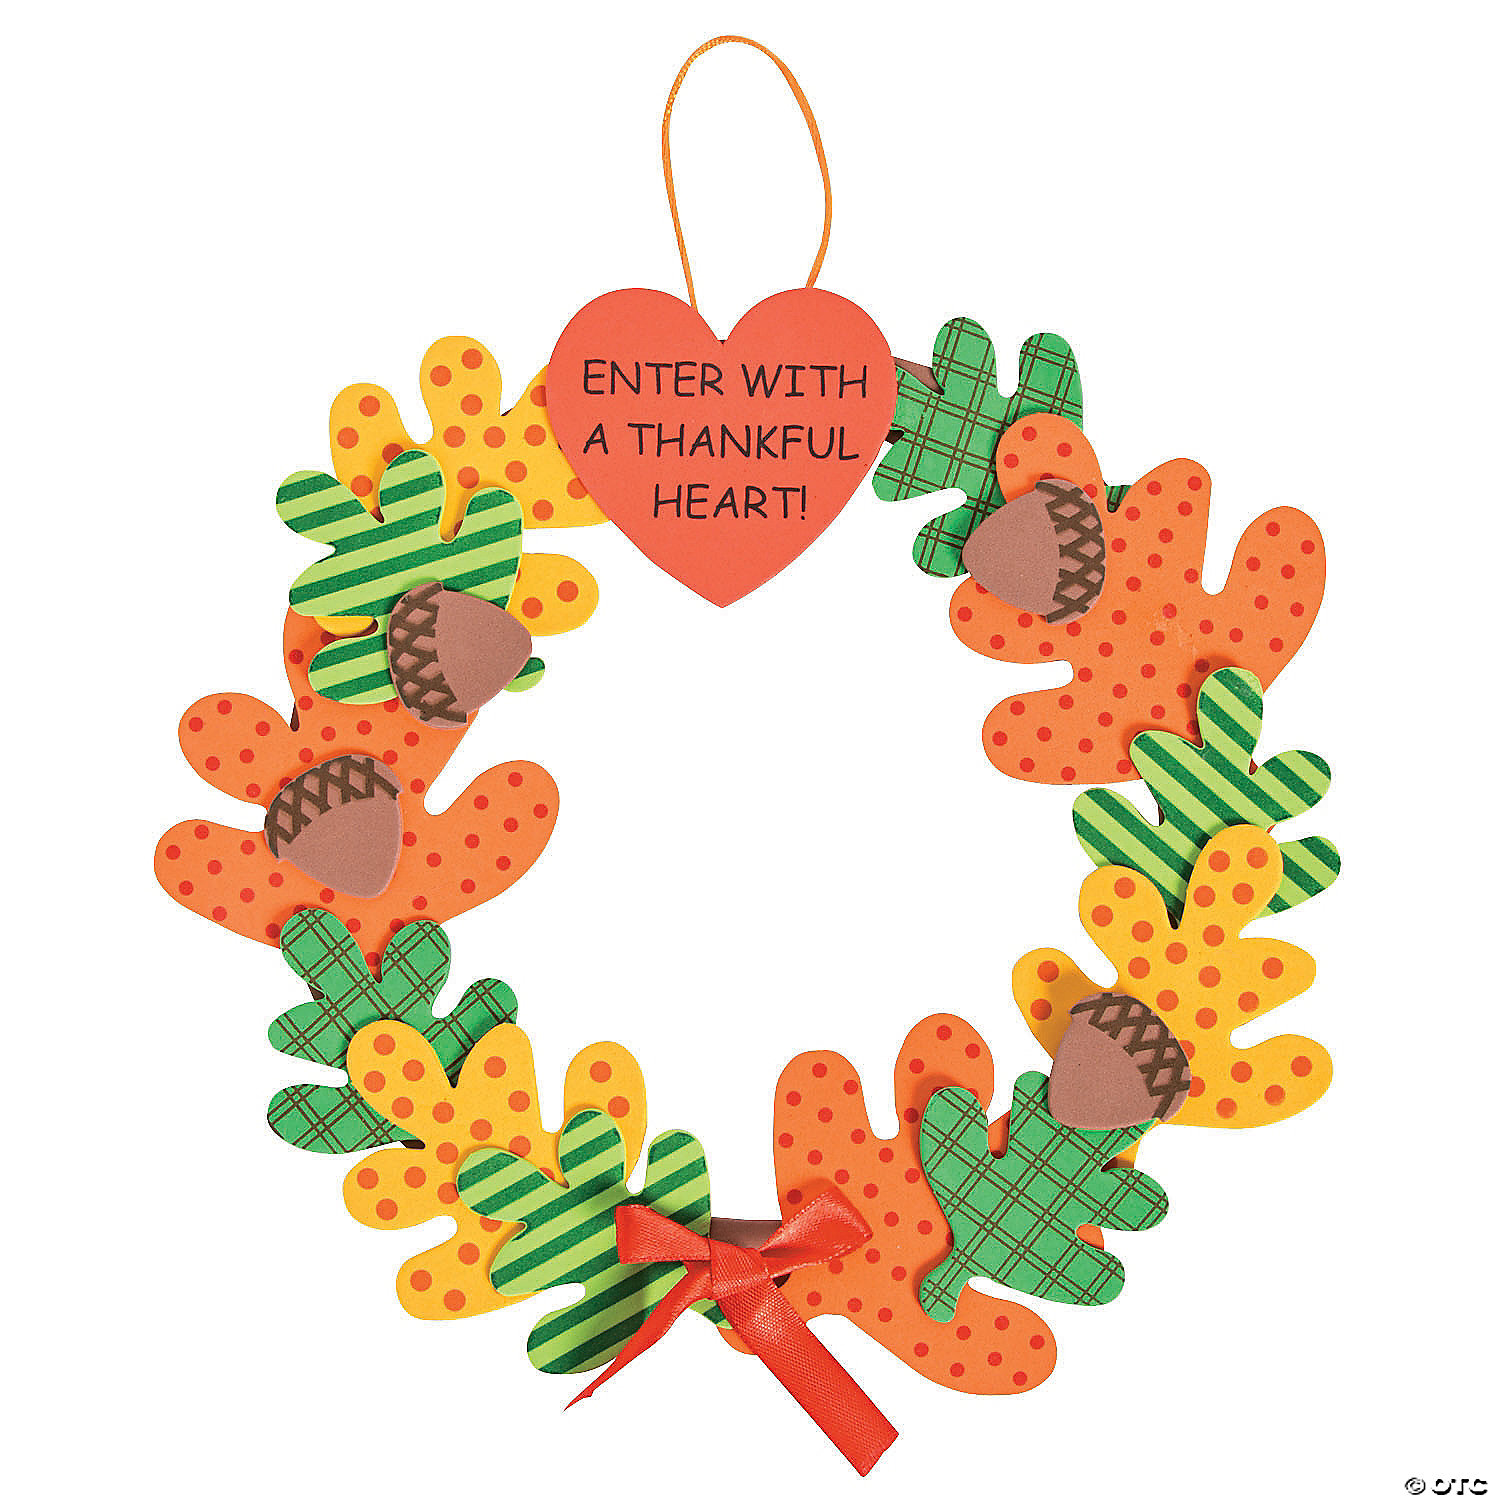 Craft Kits Wreath Craft Kits Thanksgiving 12 Pieces Fun Express Hanging Decor Craft Kits Enter with A Thankful Heart Wreath ck for Thanksgiving 